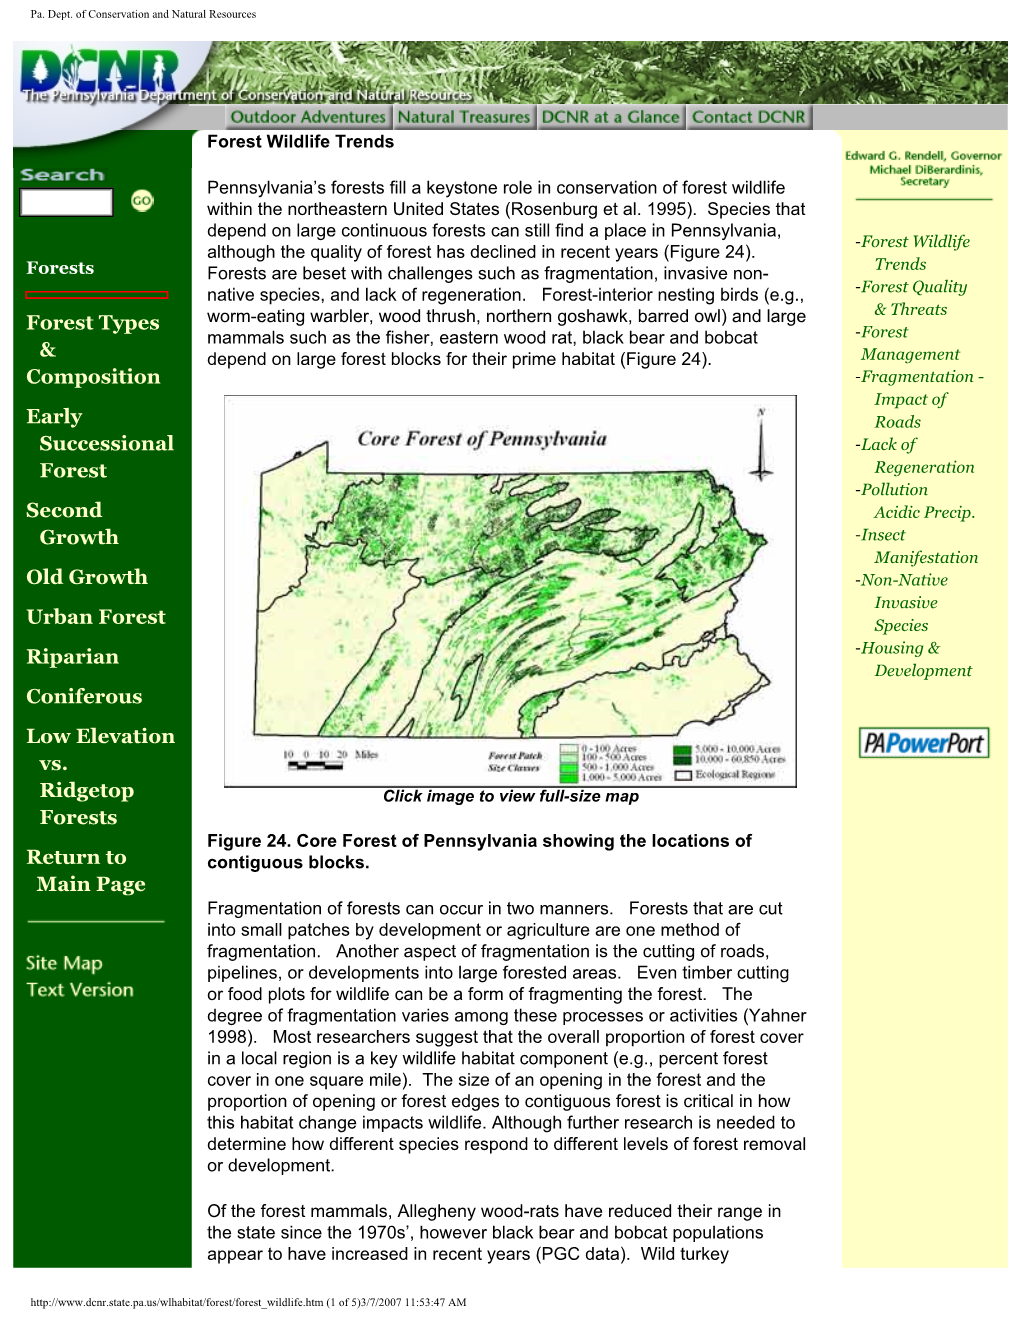 Pennsylvania Dept. of Conservation and Natural Resources